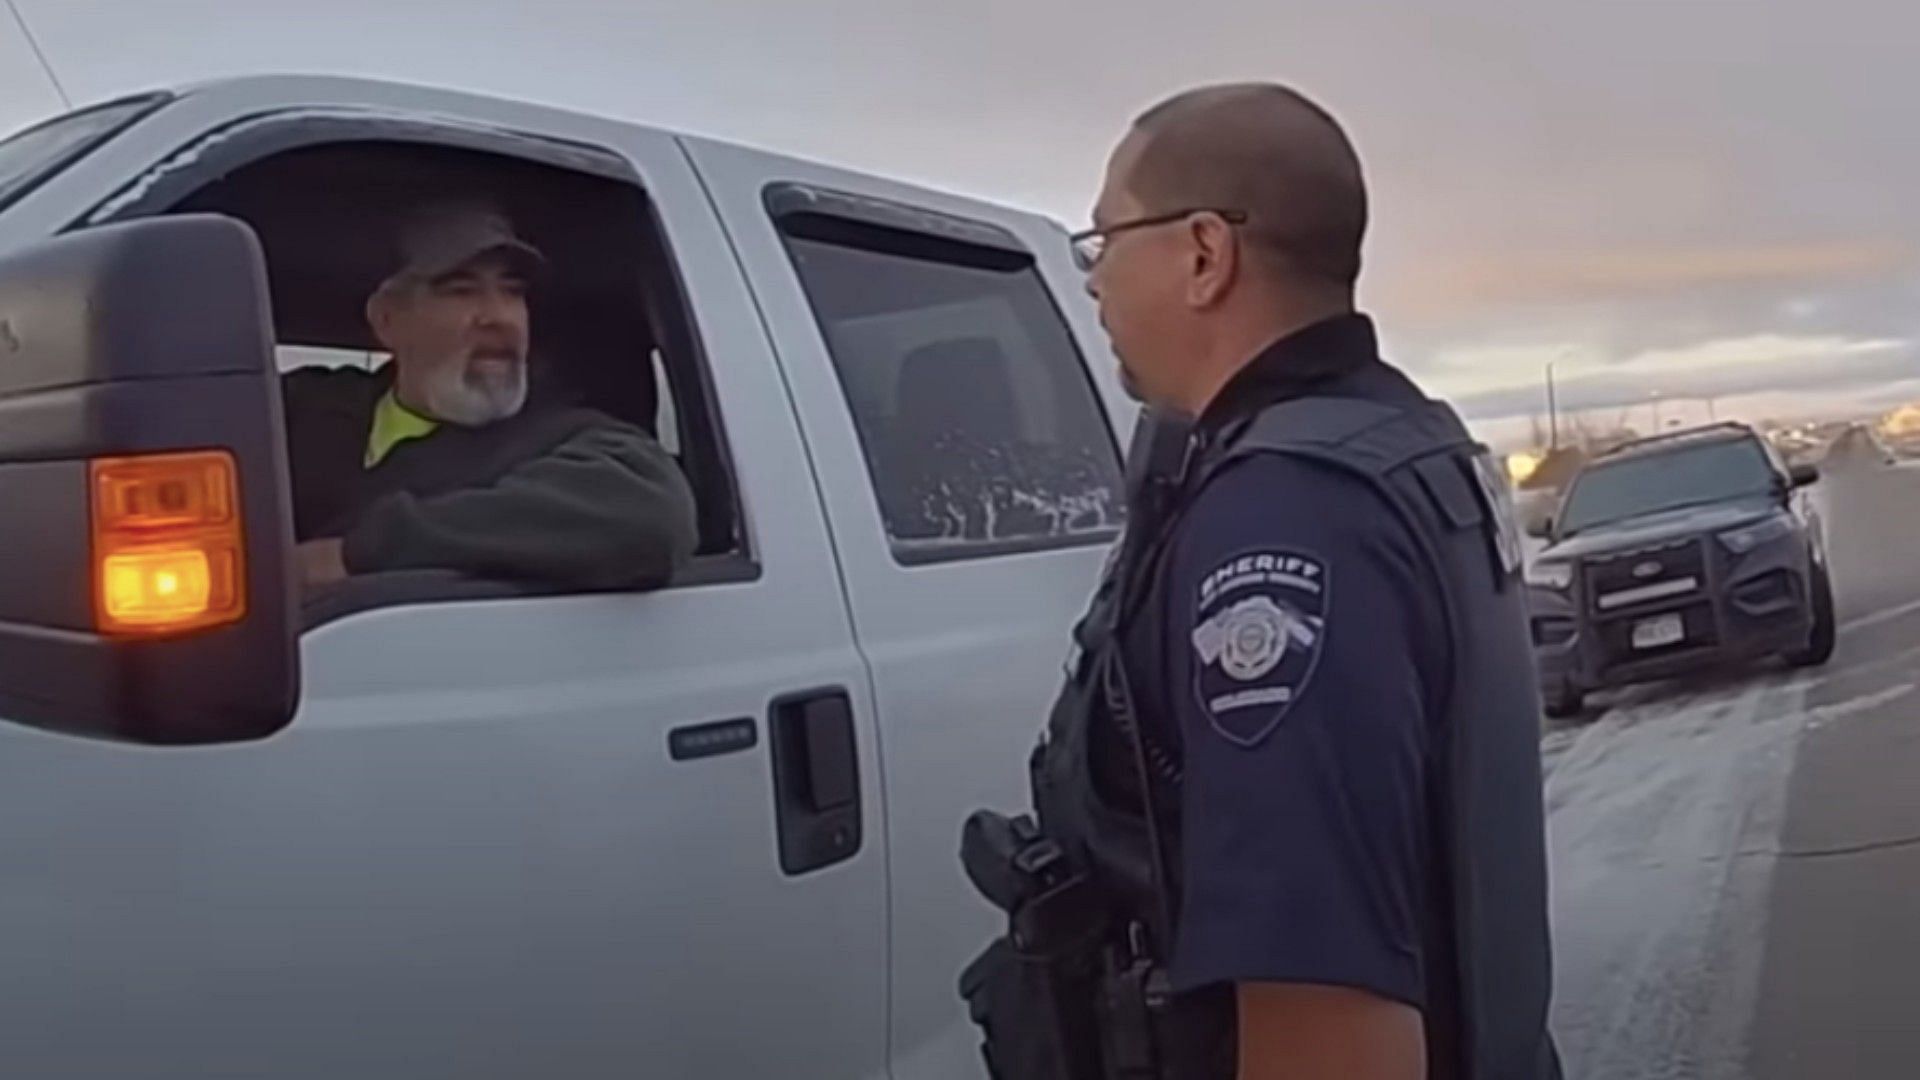 Kenneth Espinoza engaging with an officer (Image via  Las Animas County Sheriff&rsquo;s Office/Youtube)